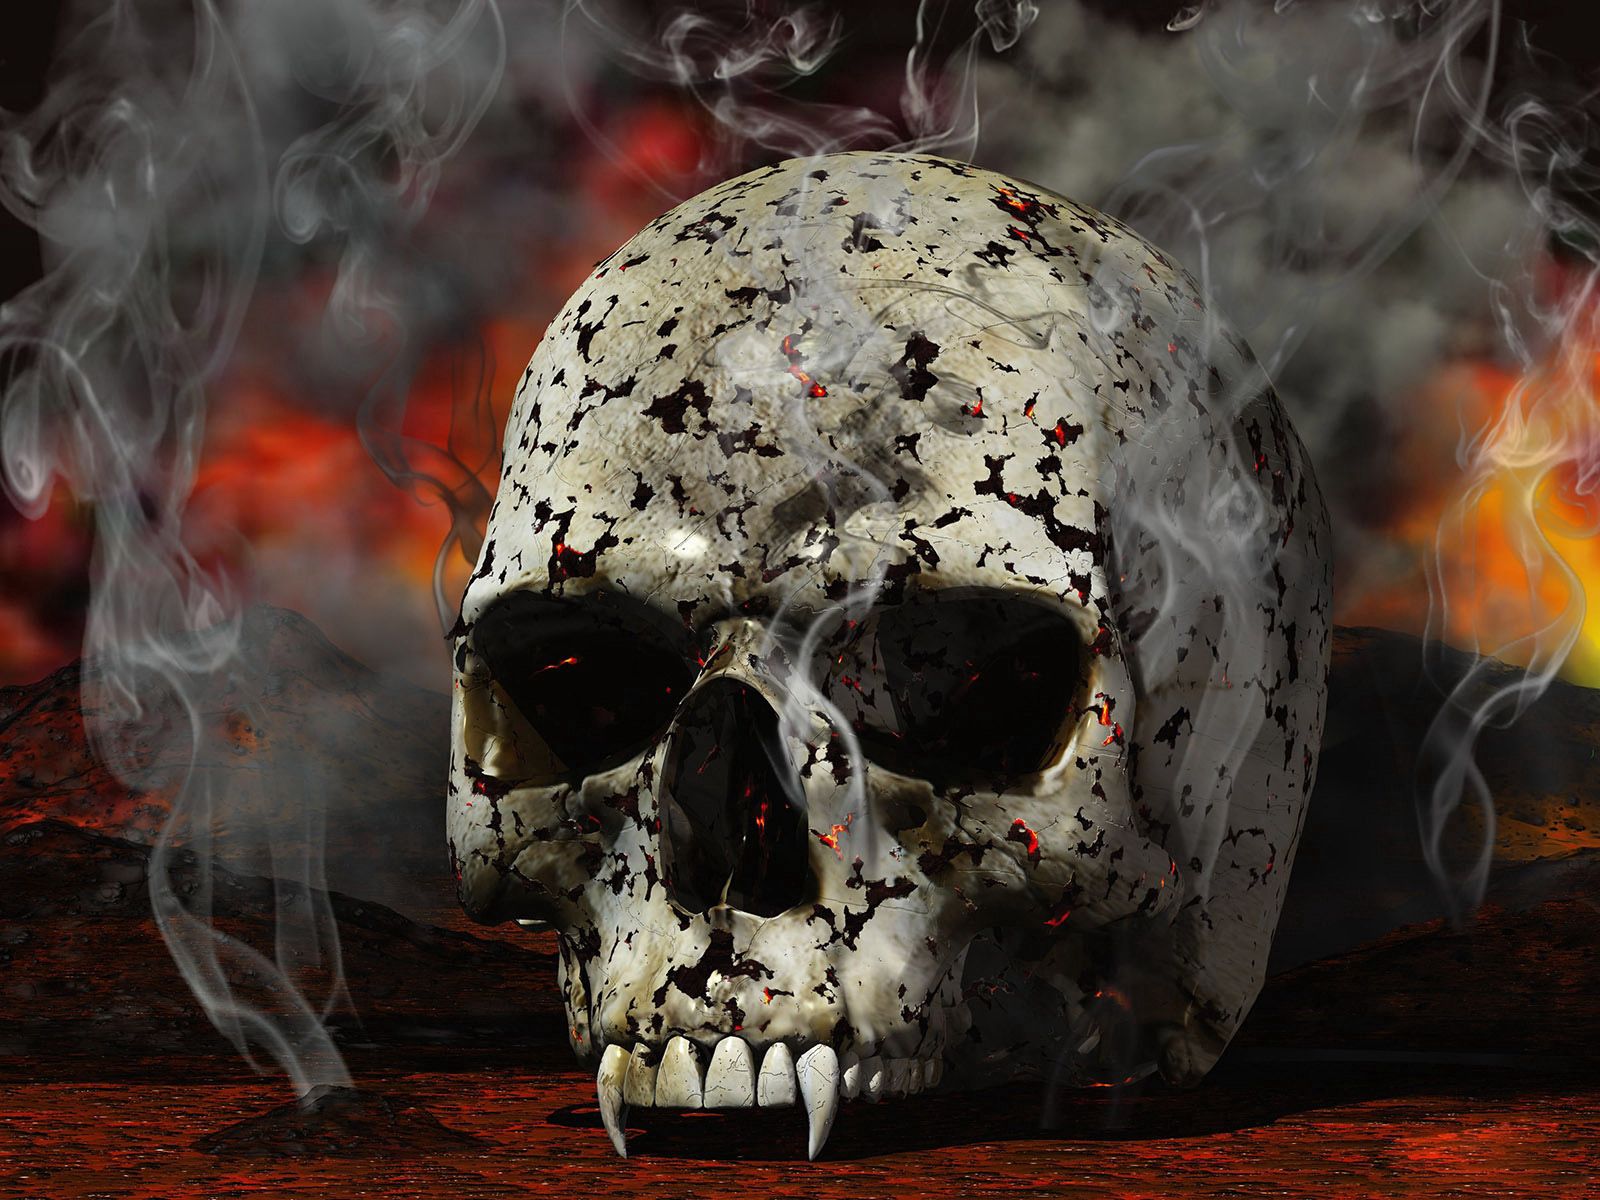 96905 download wallpaper 3d, skull, smoke, black, white, red screensavers and pictures for free